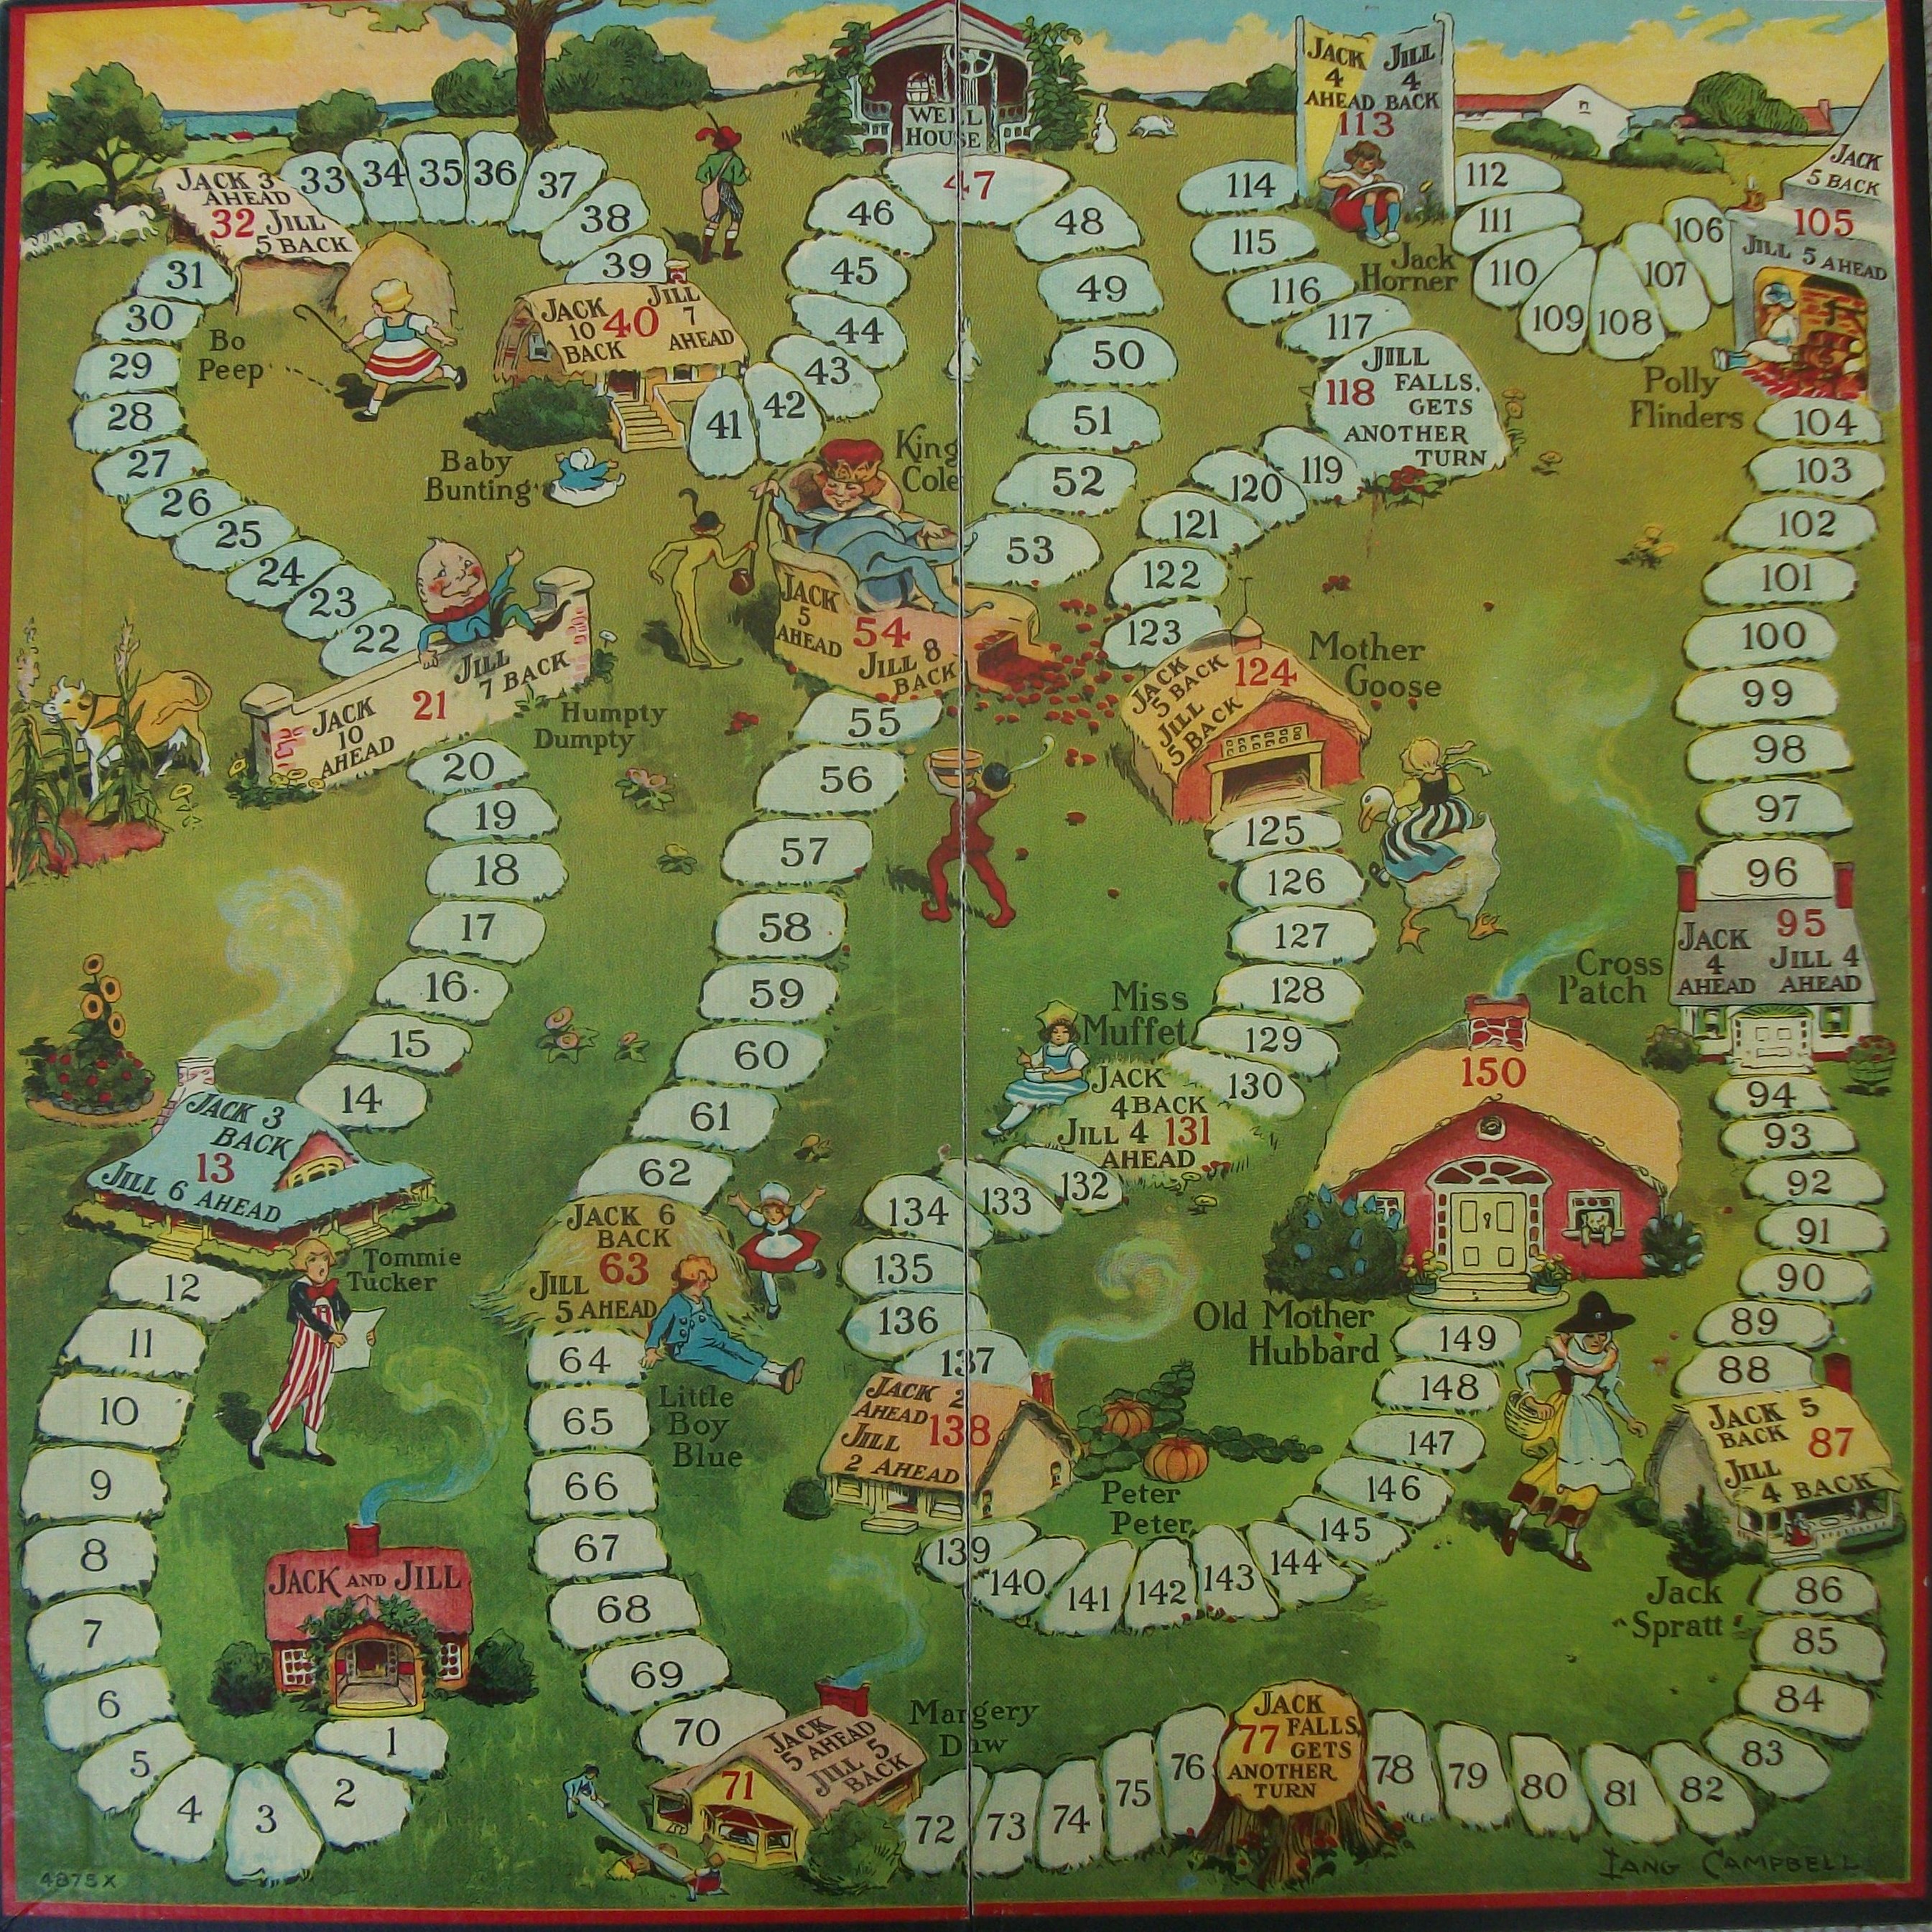 The 1938 Vintage Board Game of Jack and Jill